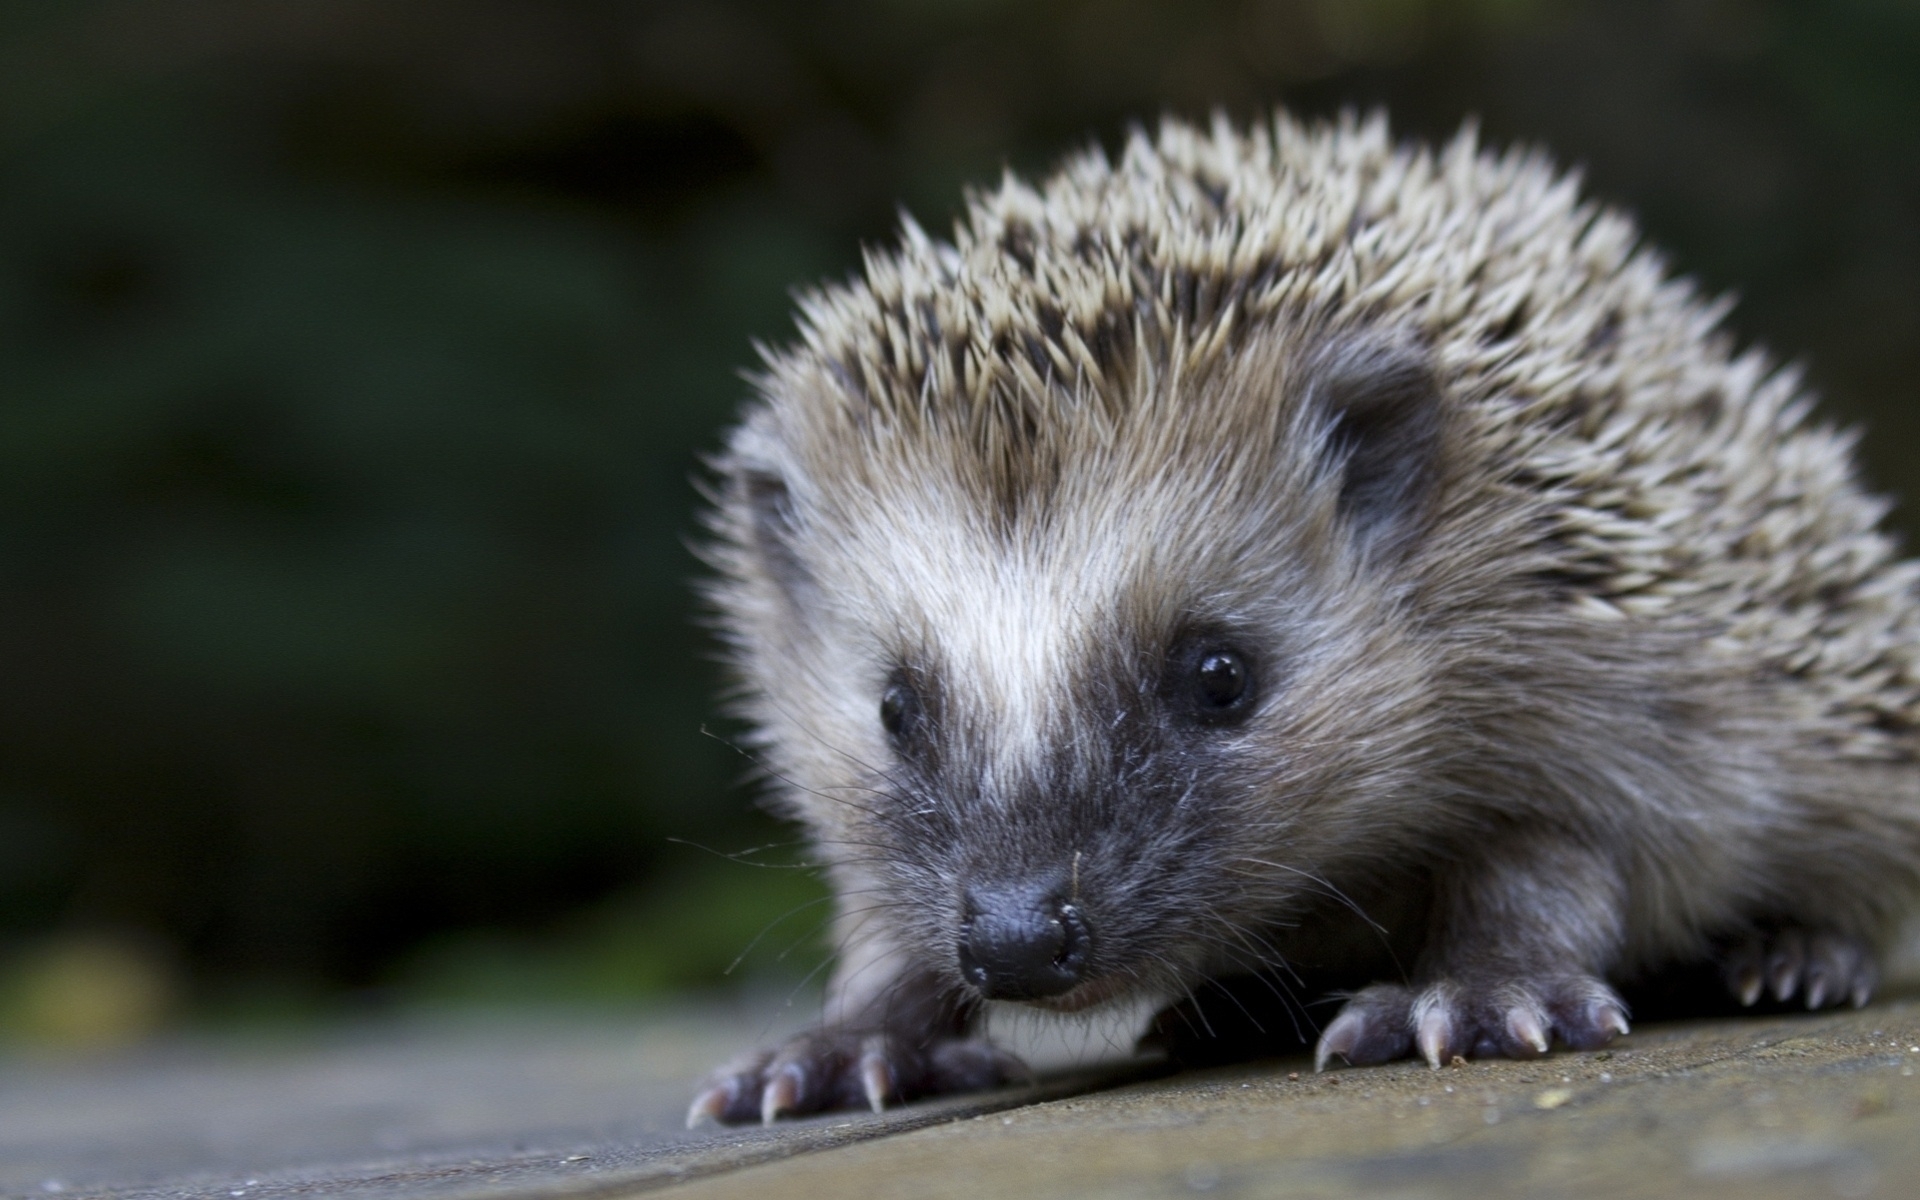 26247 download wallpaper animals, hedgehogs screensavers and pictures for free